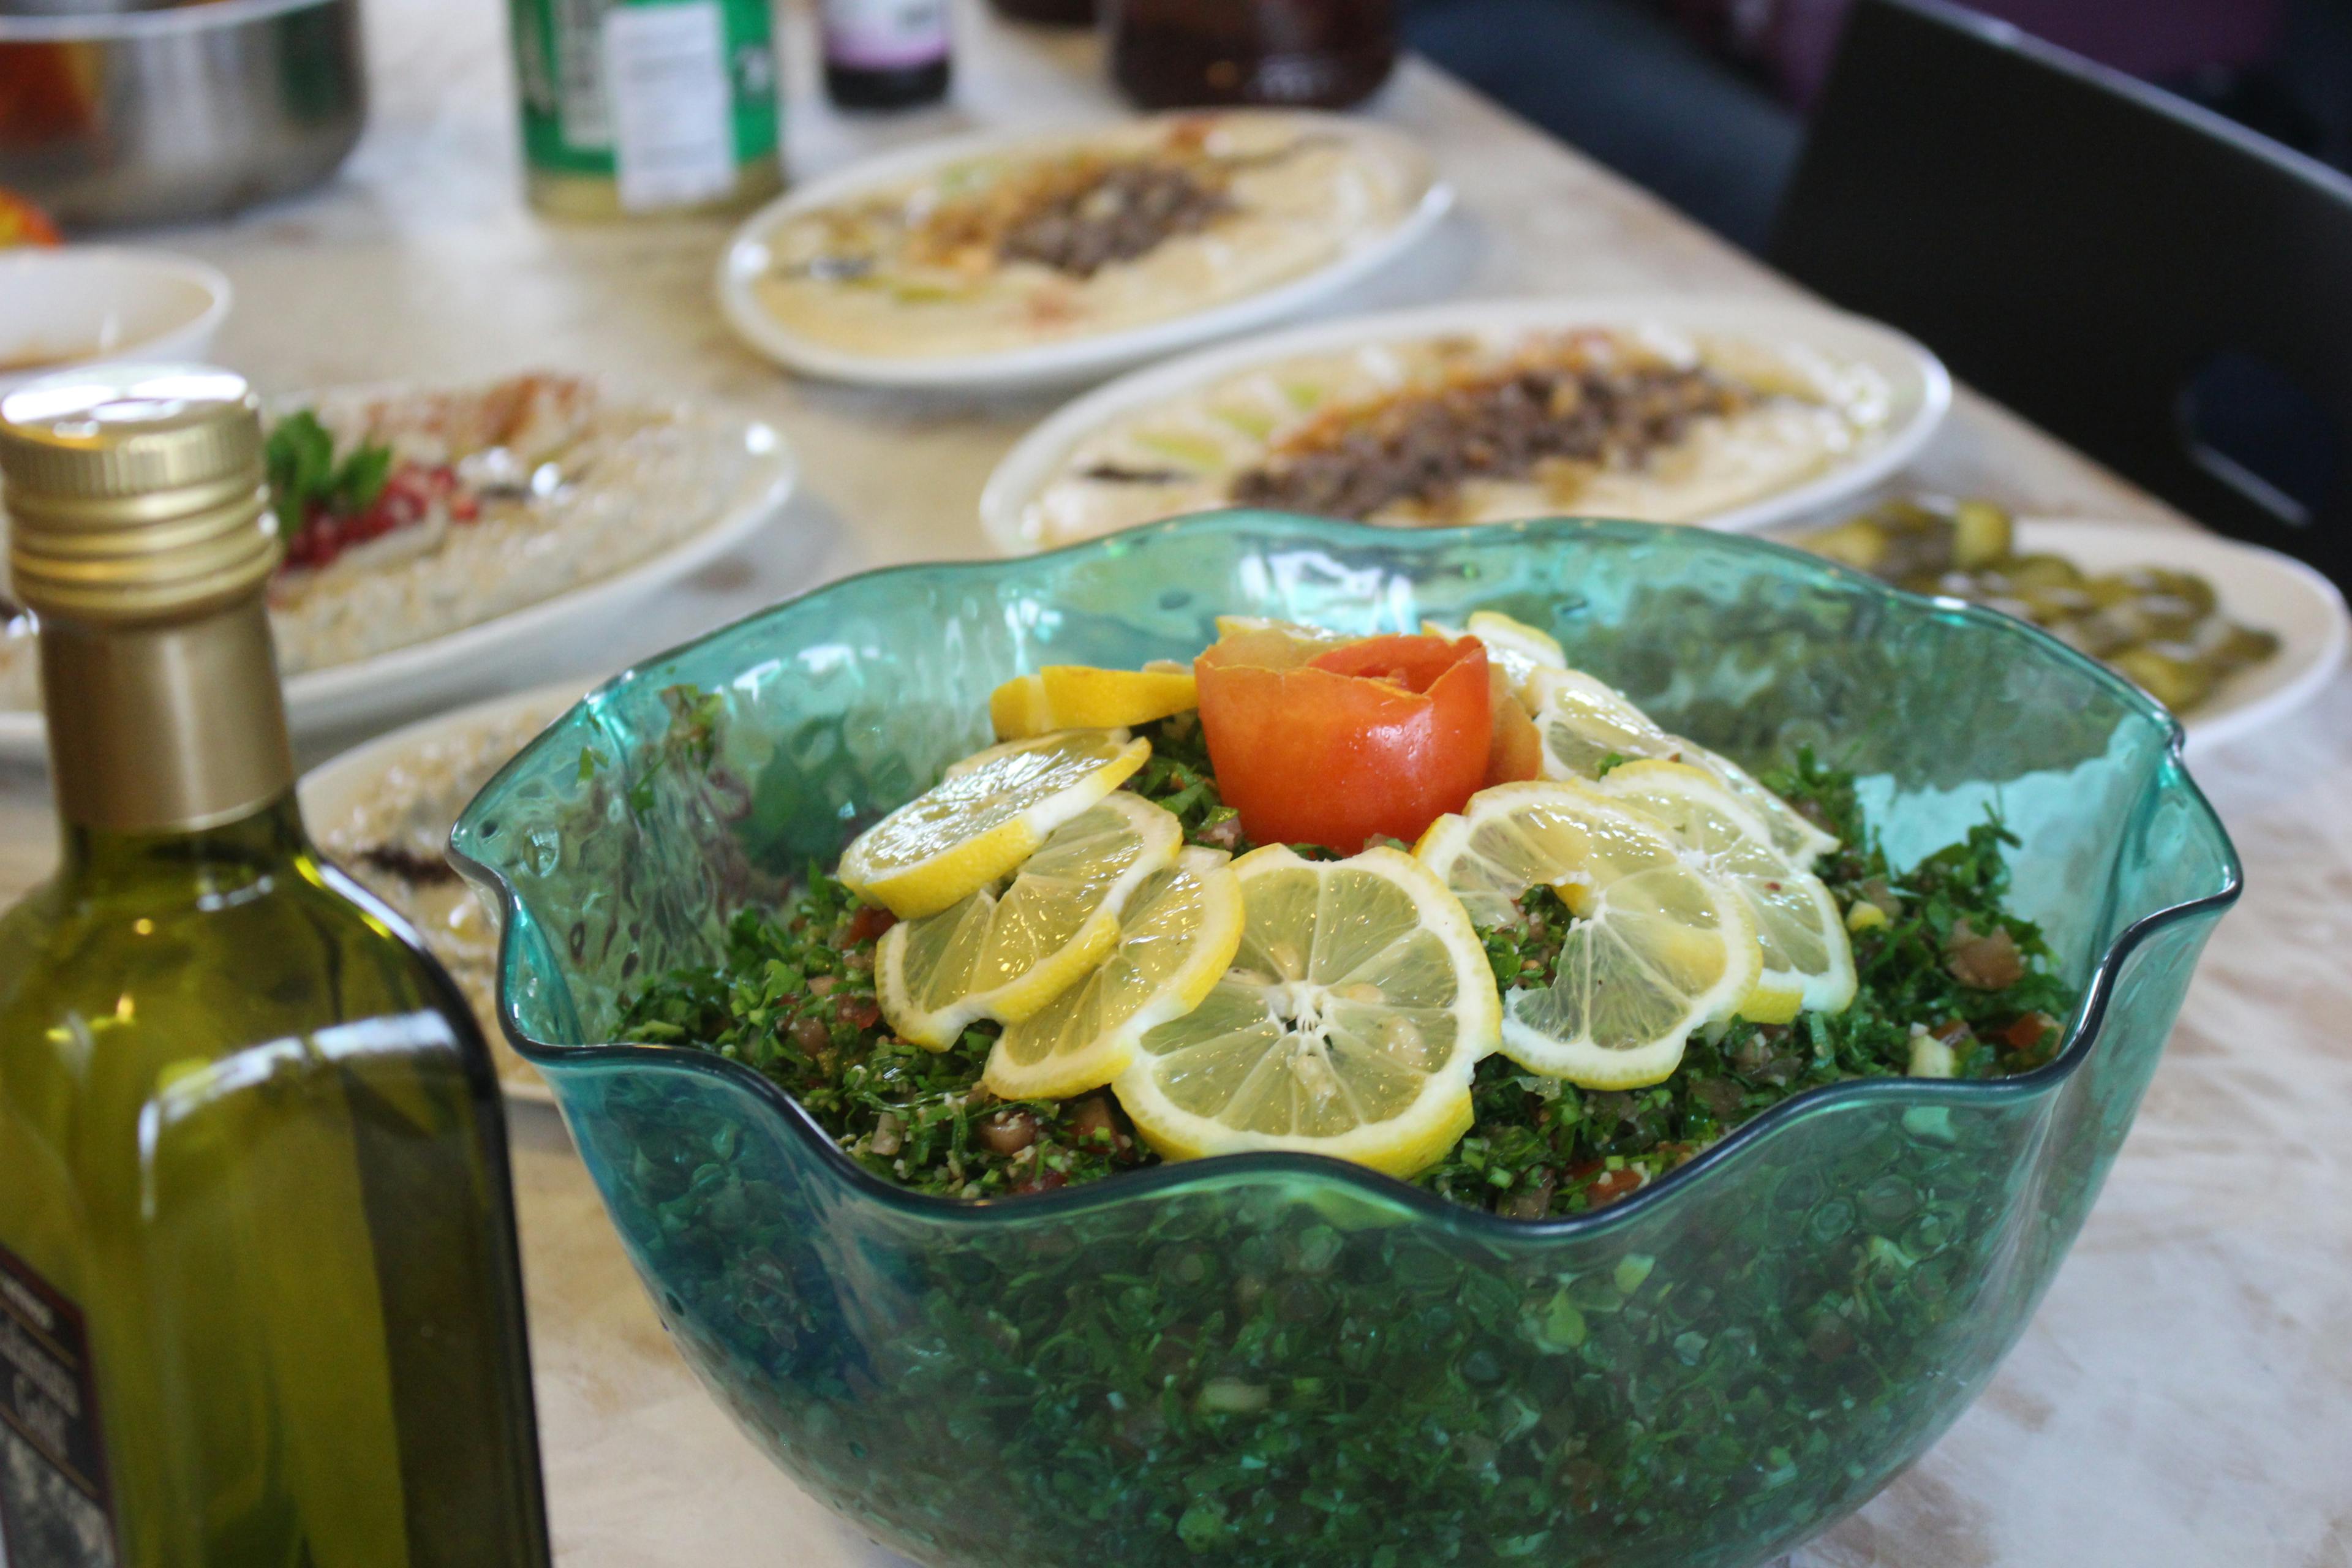 A salad in a big blue bowl, a bottle of olive oil, and various other plates are placed on a table. 